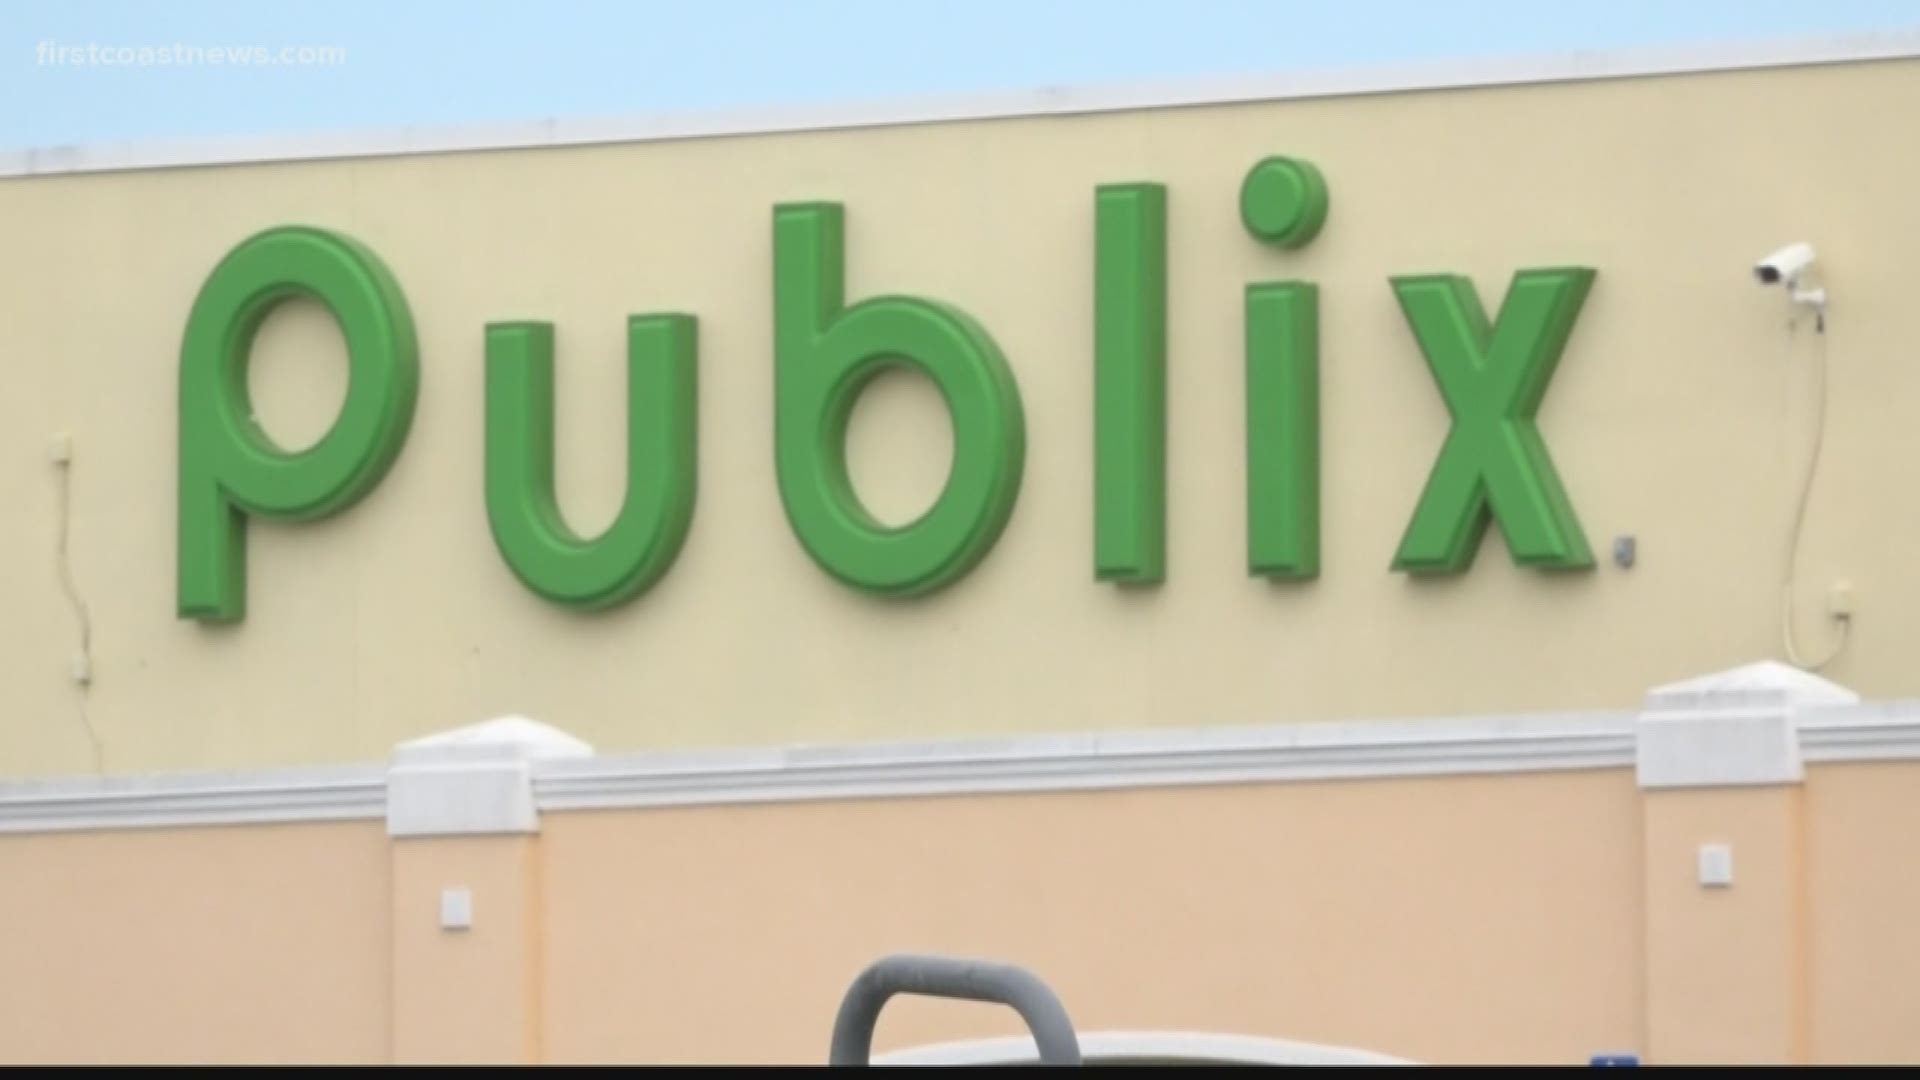 Neighbors, city officials and even the Gateway Town Center are trying to find a way to keep Publix open, instead of closing in December.